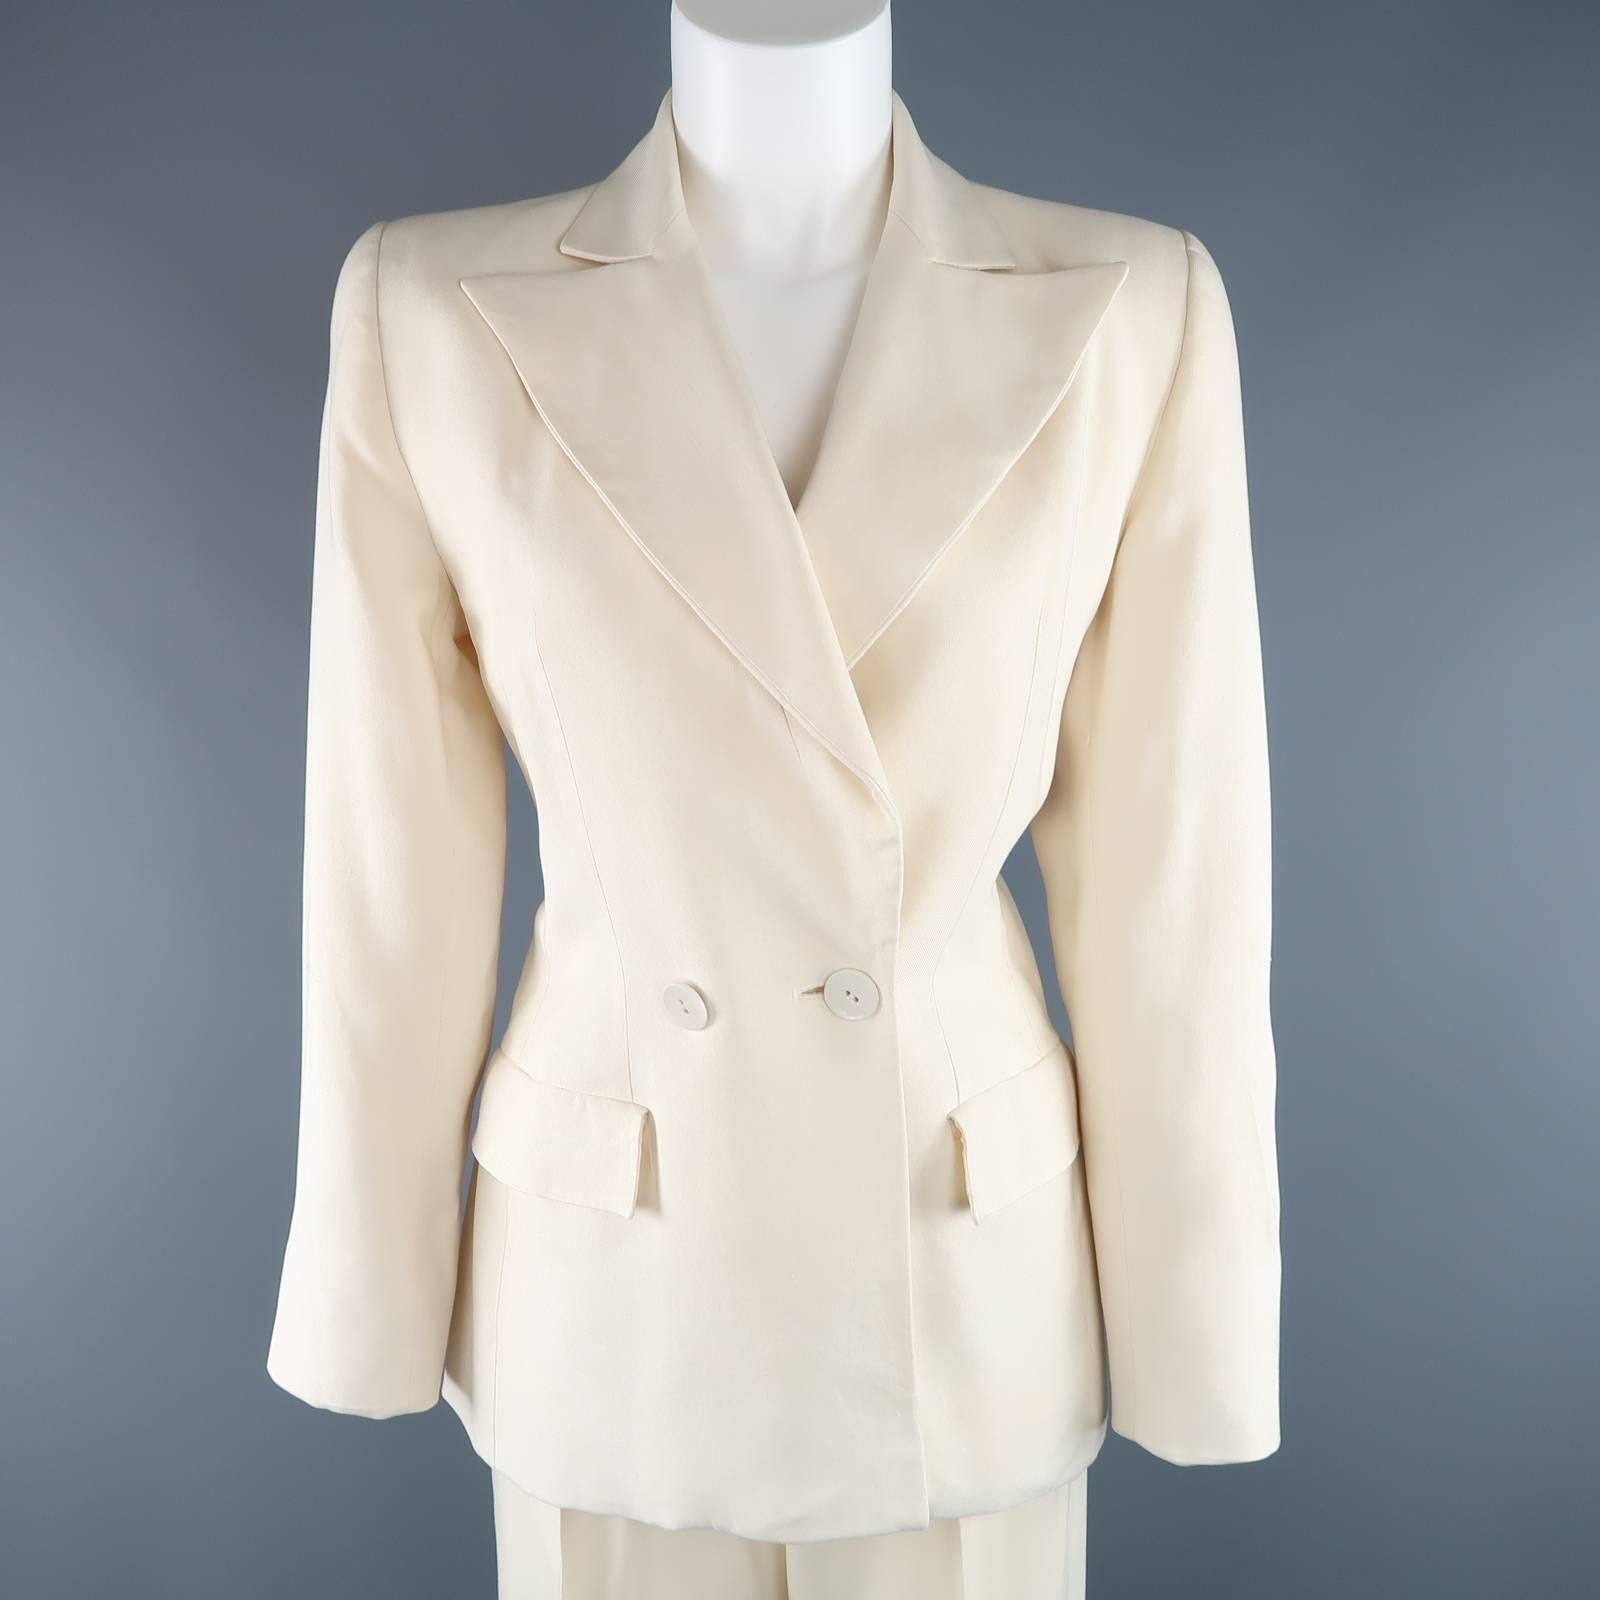 This gorgeous vintage YVES SAINT LAURENT Rive Gauche suit comes in textured cream silk and includes a peak lapel, double breasted blazer jacket and matching high rise, pleated trousers. Imperfections on trousers. As-Is. Made in France.
 
Good 